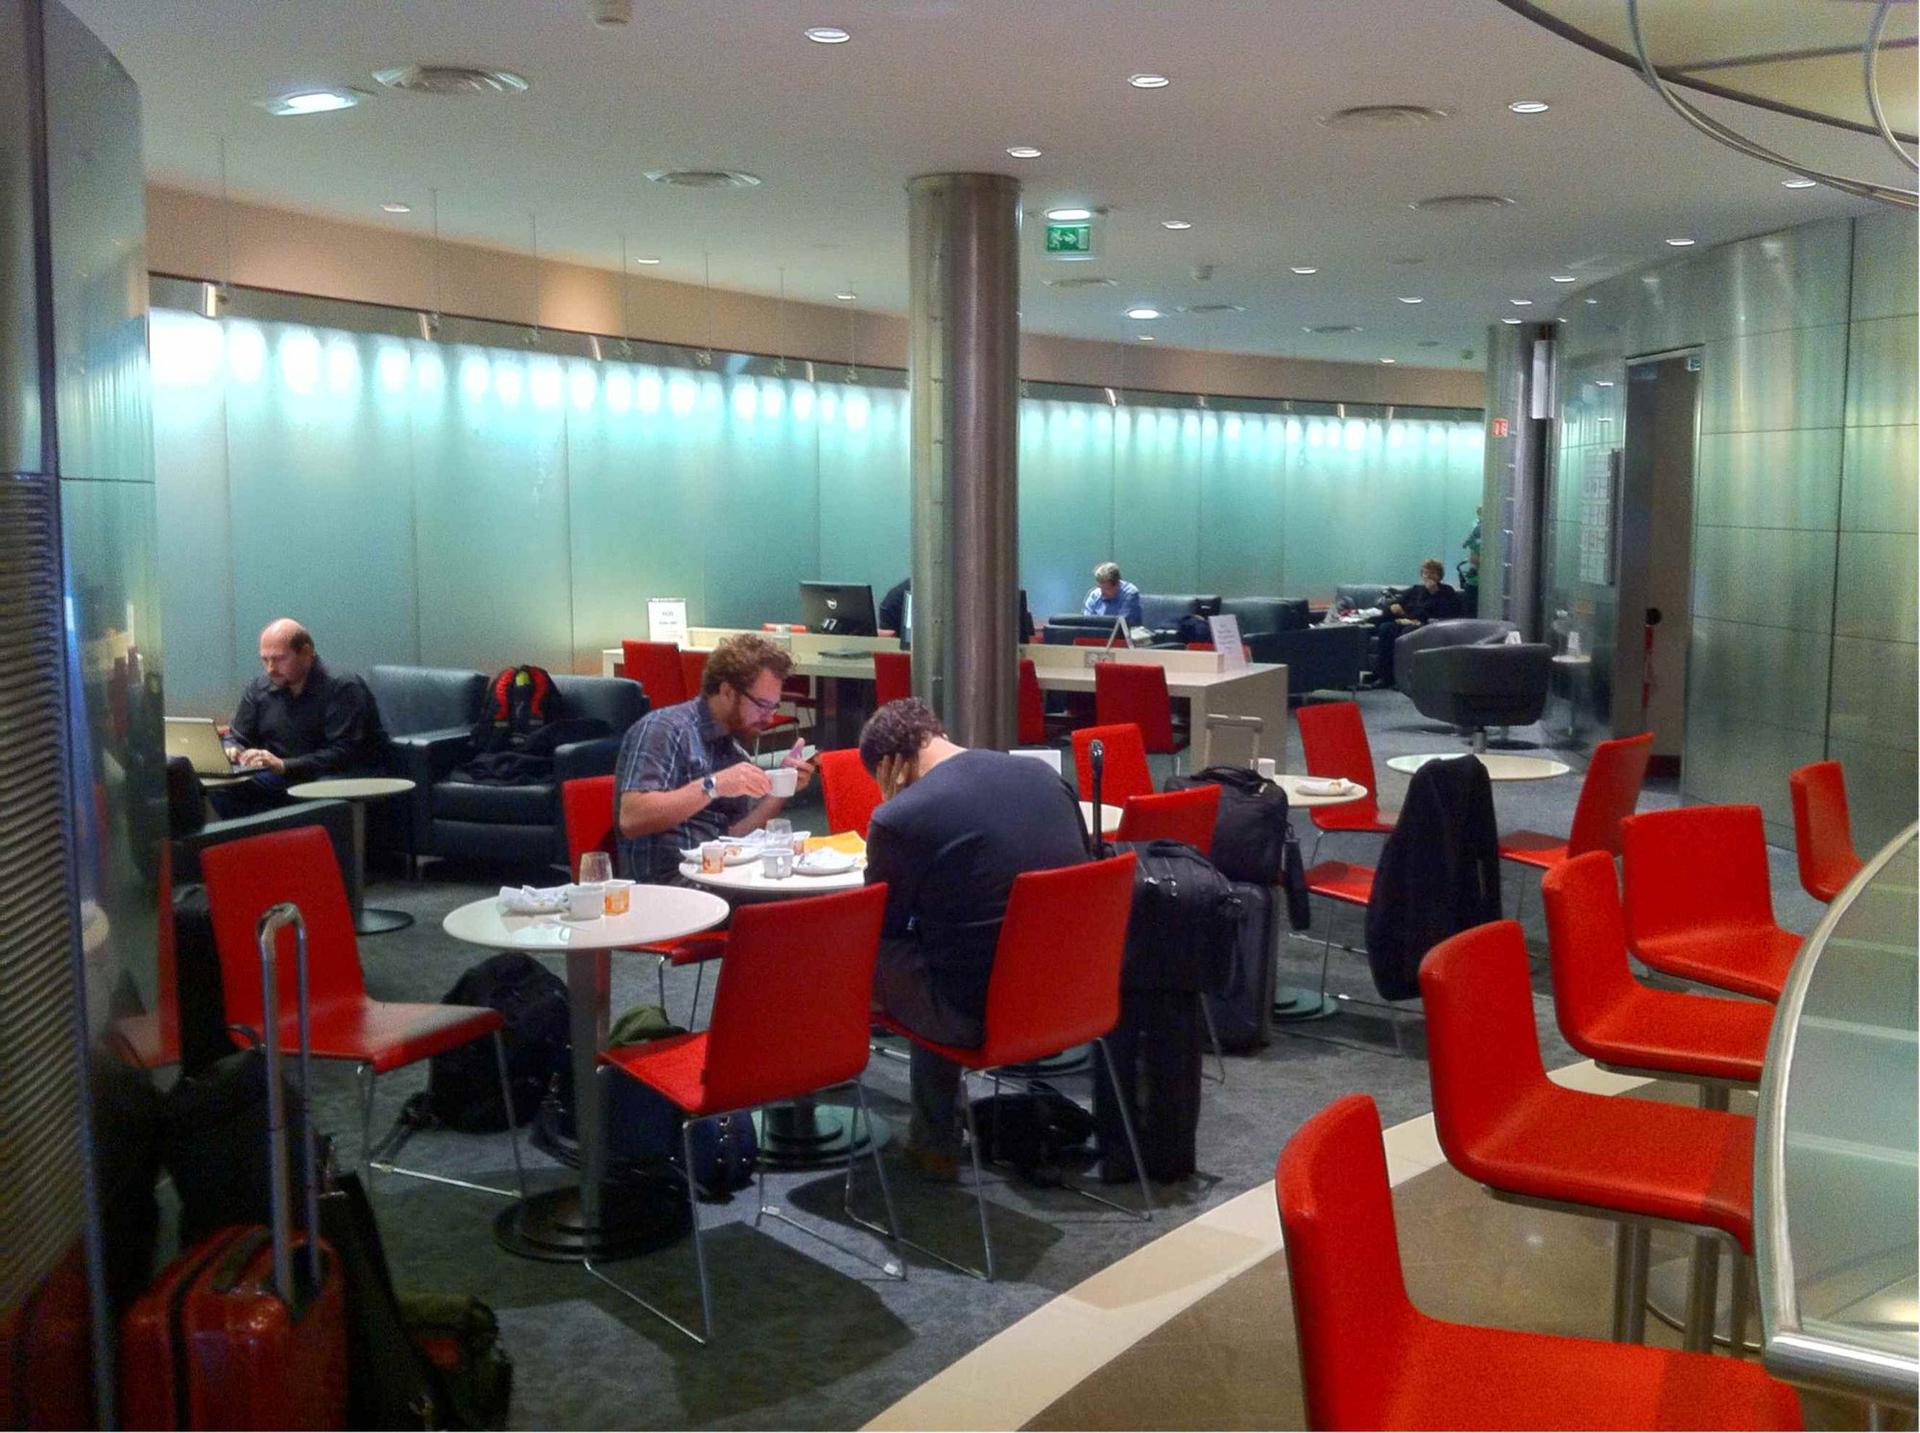 Air Canada Maple Leaf Lounge image 25 of 64